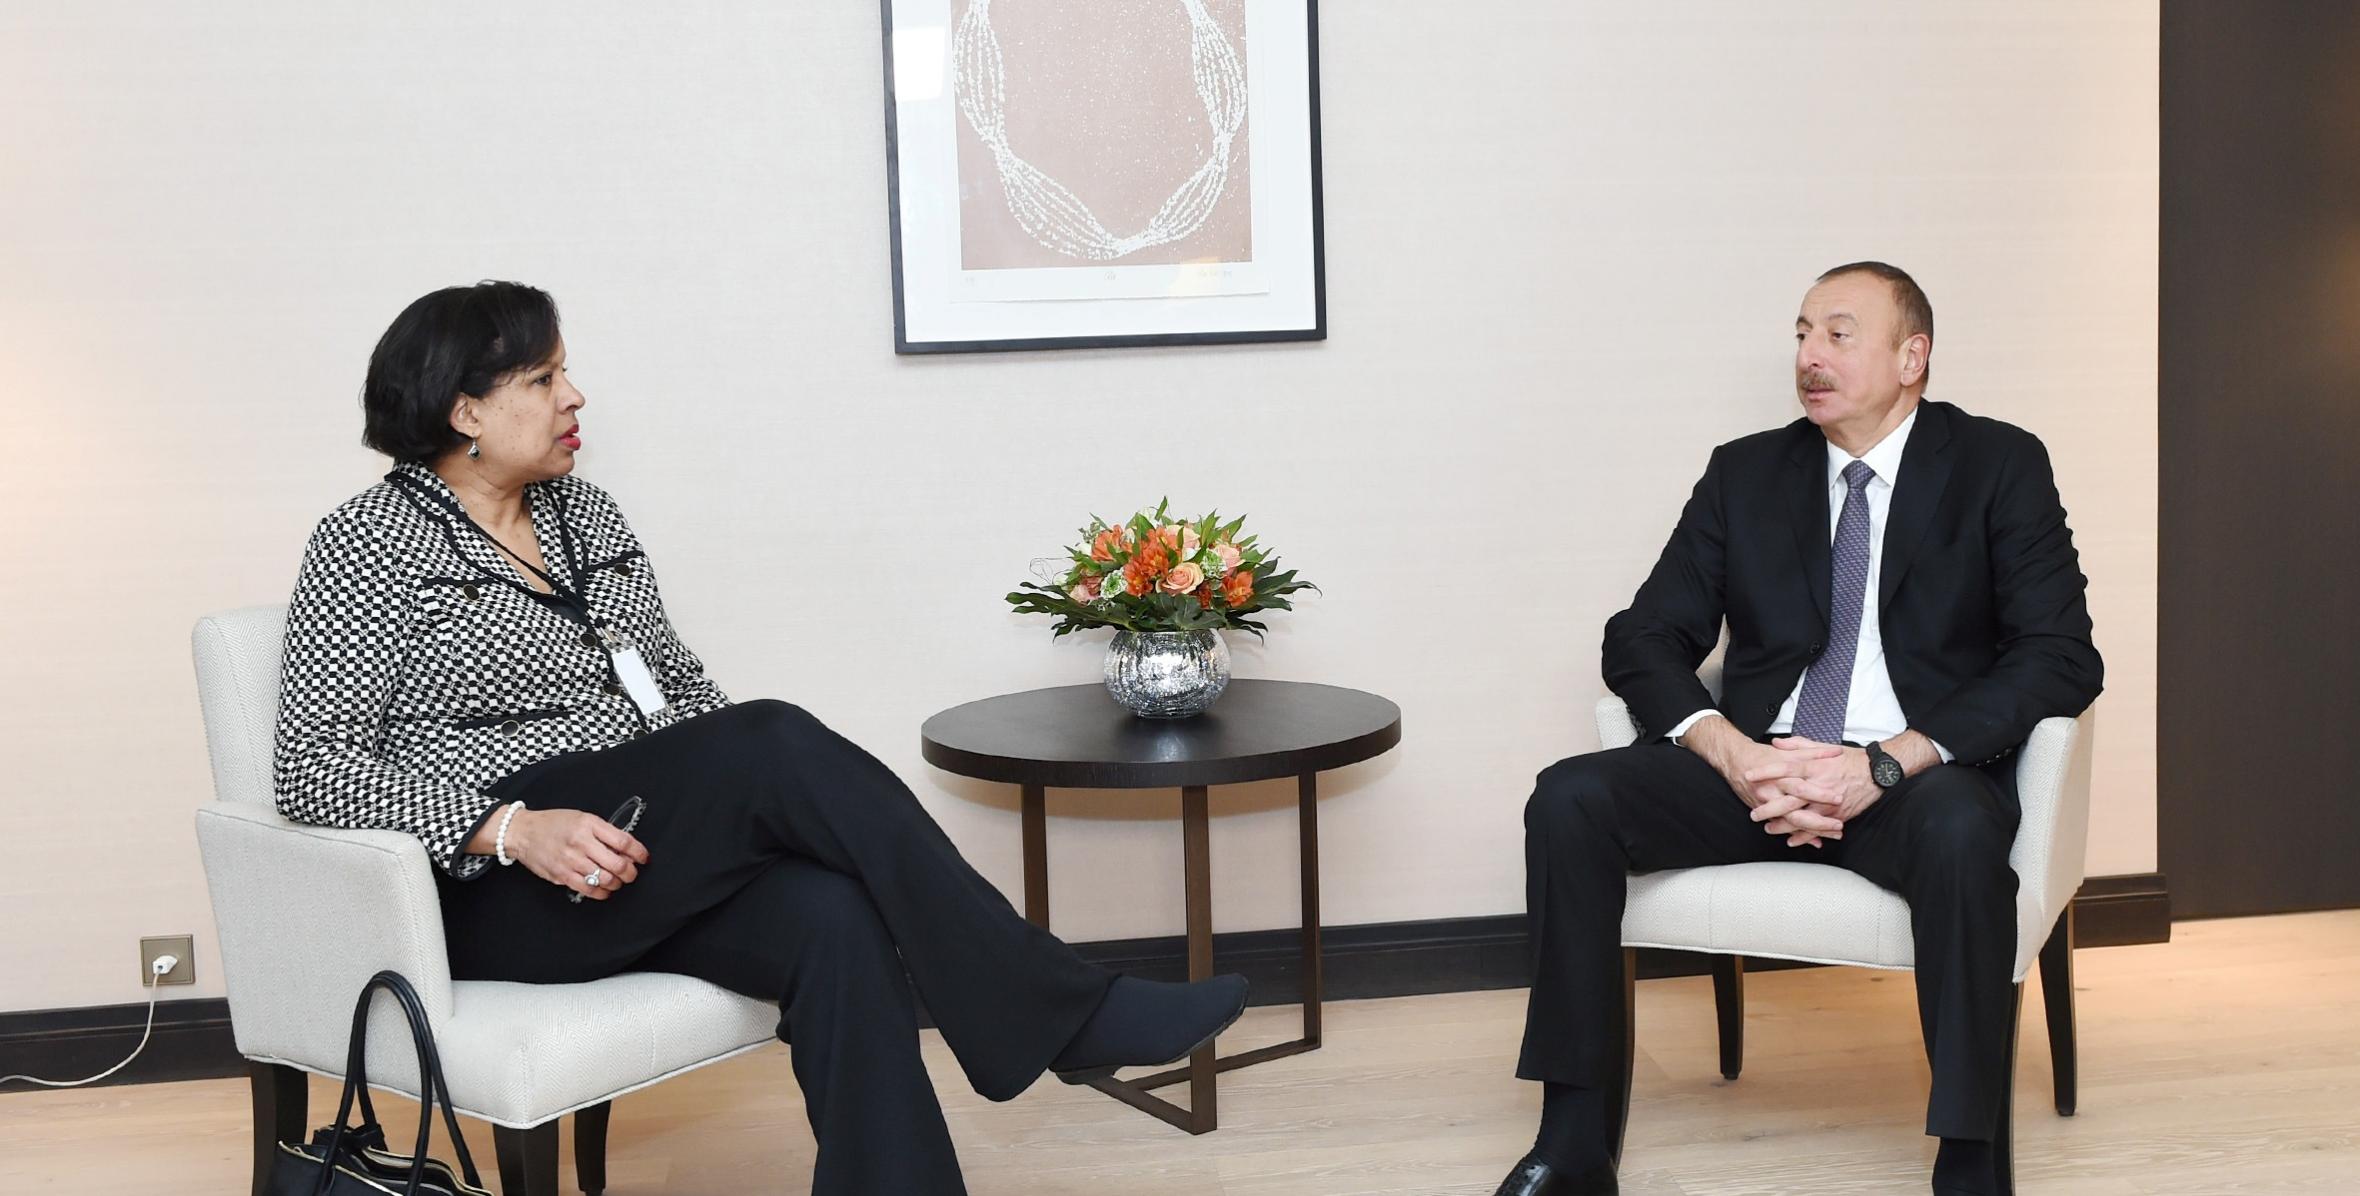 Ilham Aliyev met with corporate vice president of Worldwide Public Sector at Microsoft